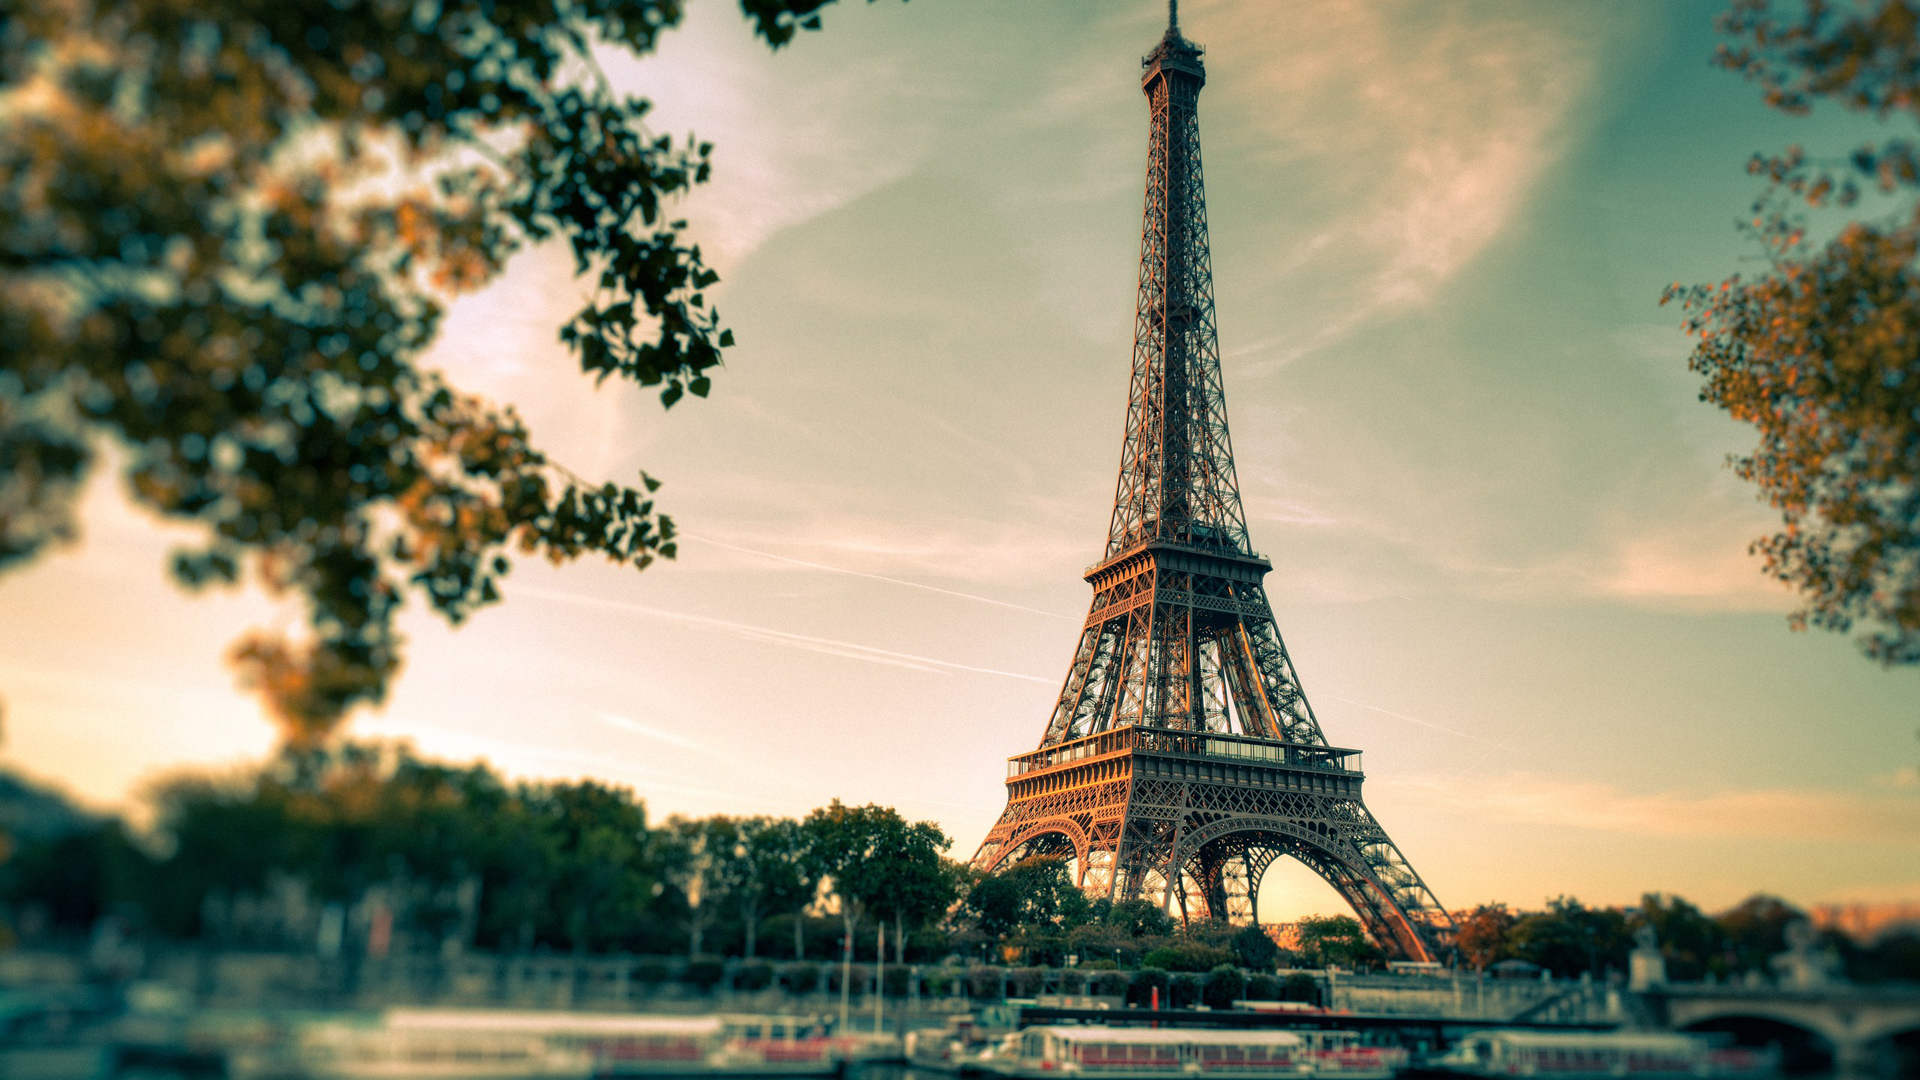 35 HD Paris Backgrounds The City Of Lights And Romance